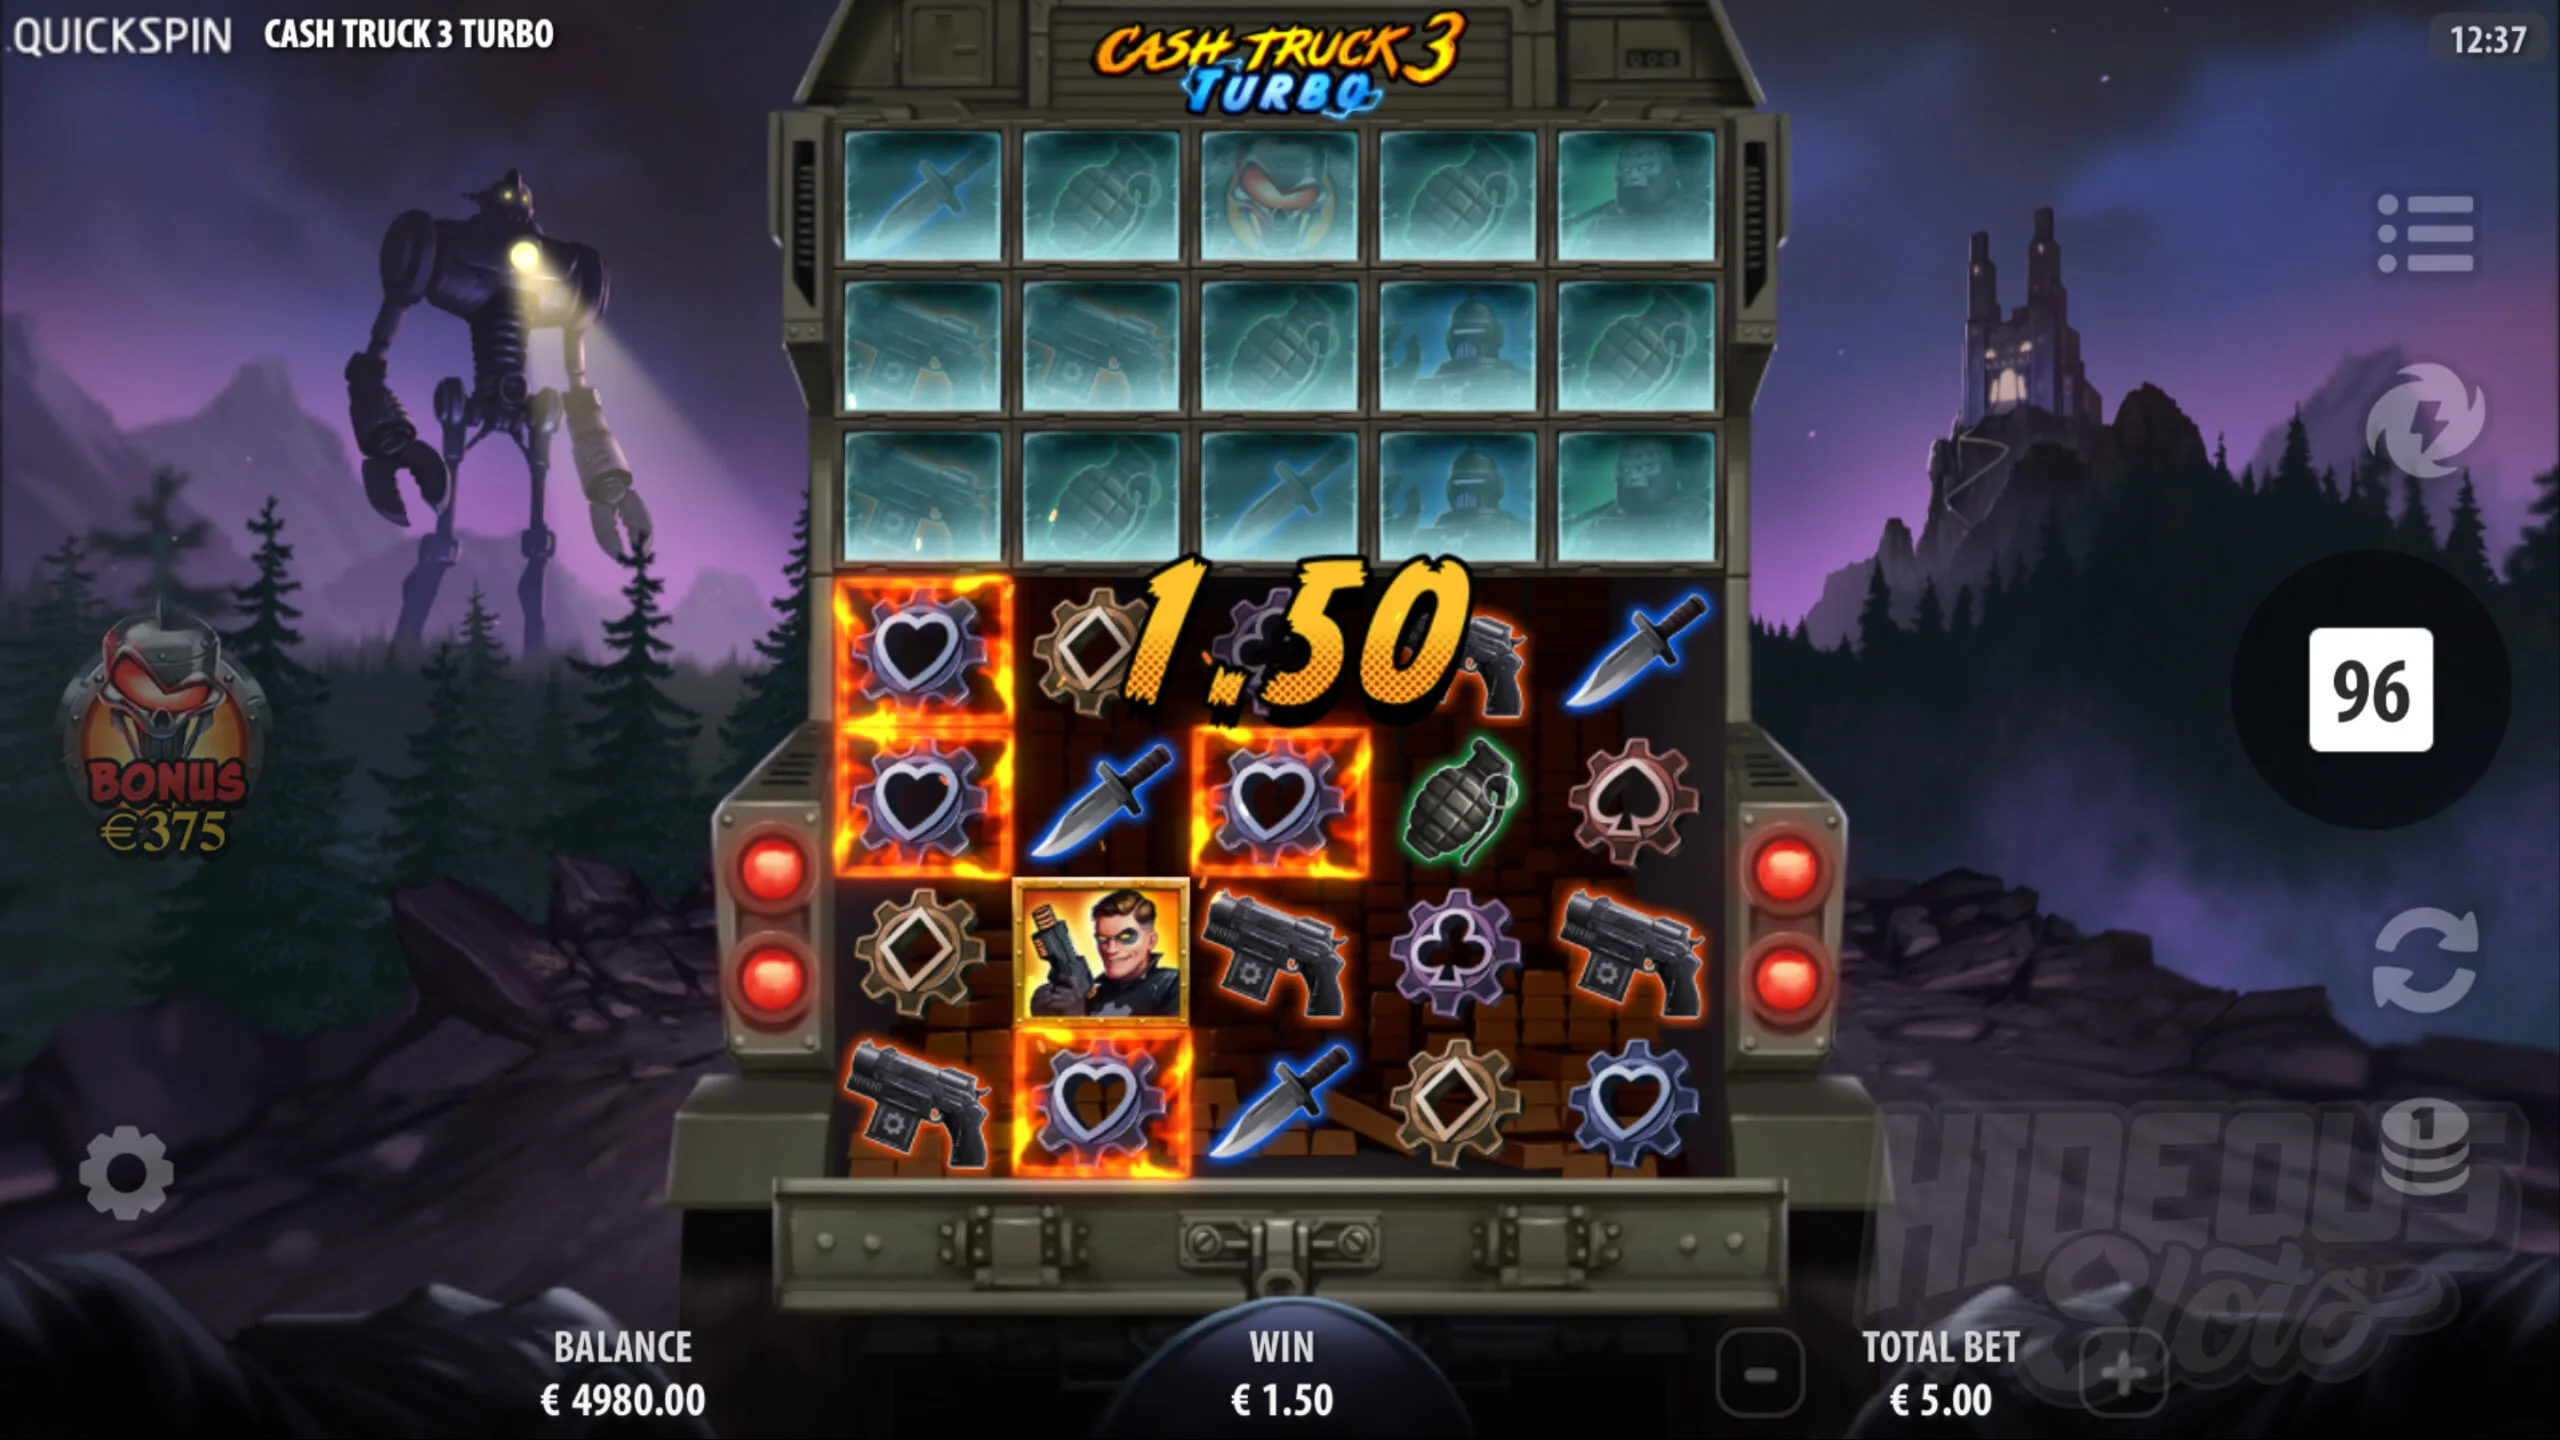 Cash Truck 3 Turbo Offers Players Up To 16,807 Ways to Win